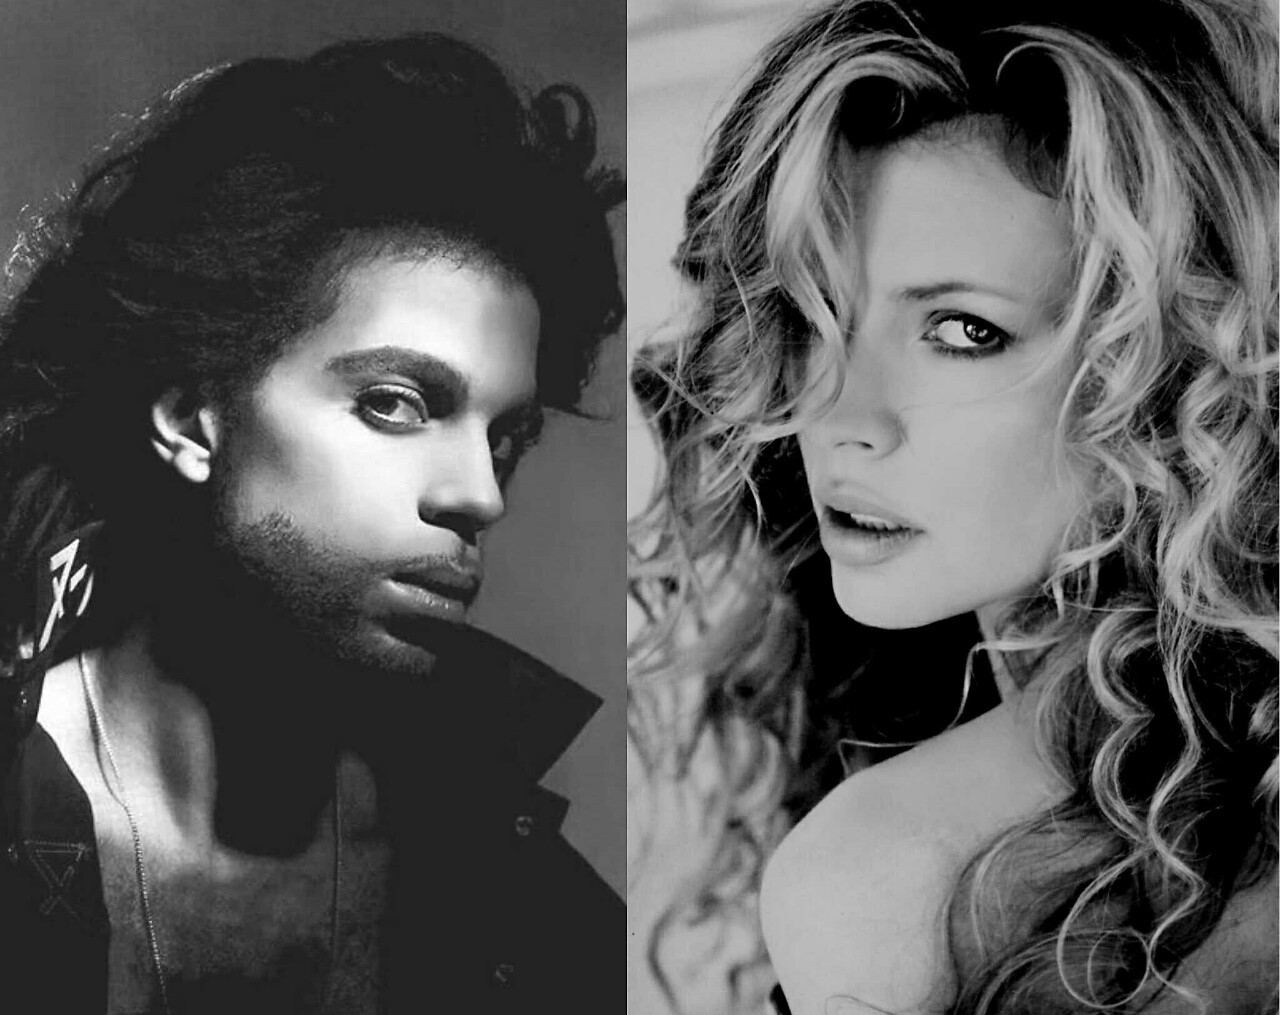 “Kim Basinger was so in love with Prince in 1989 that she gave up Hollywood and moved to Prince’s hometown of Minneapolis to be with him. Her family, believing that Prince had her under some spell, was concerned enough for her that they arrived,...